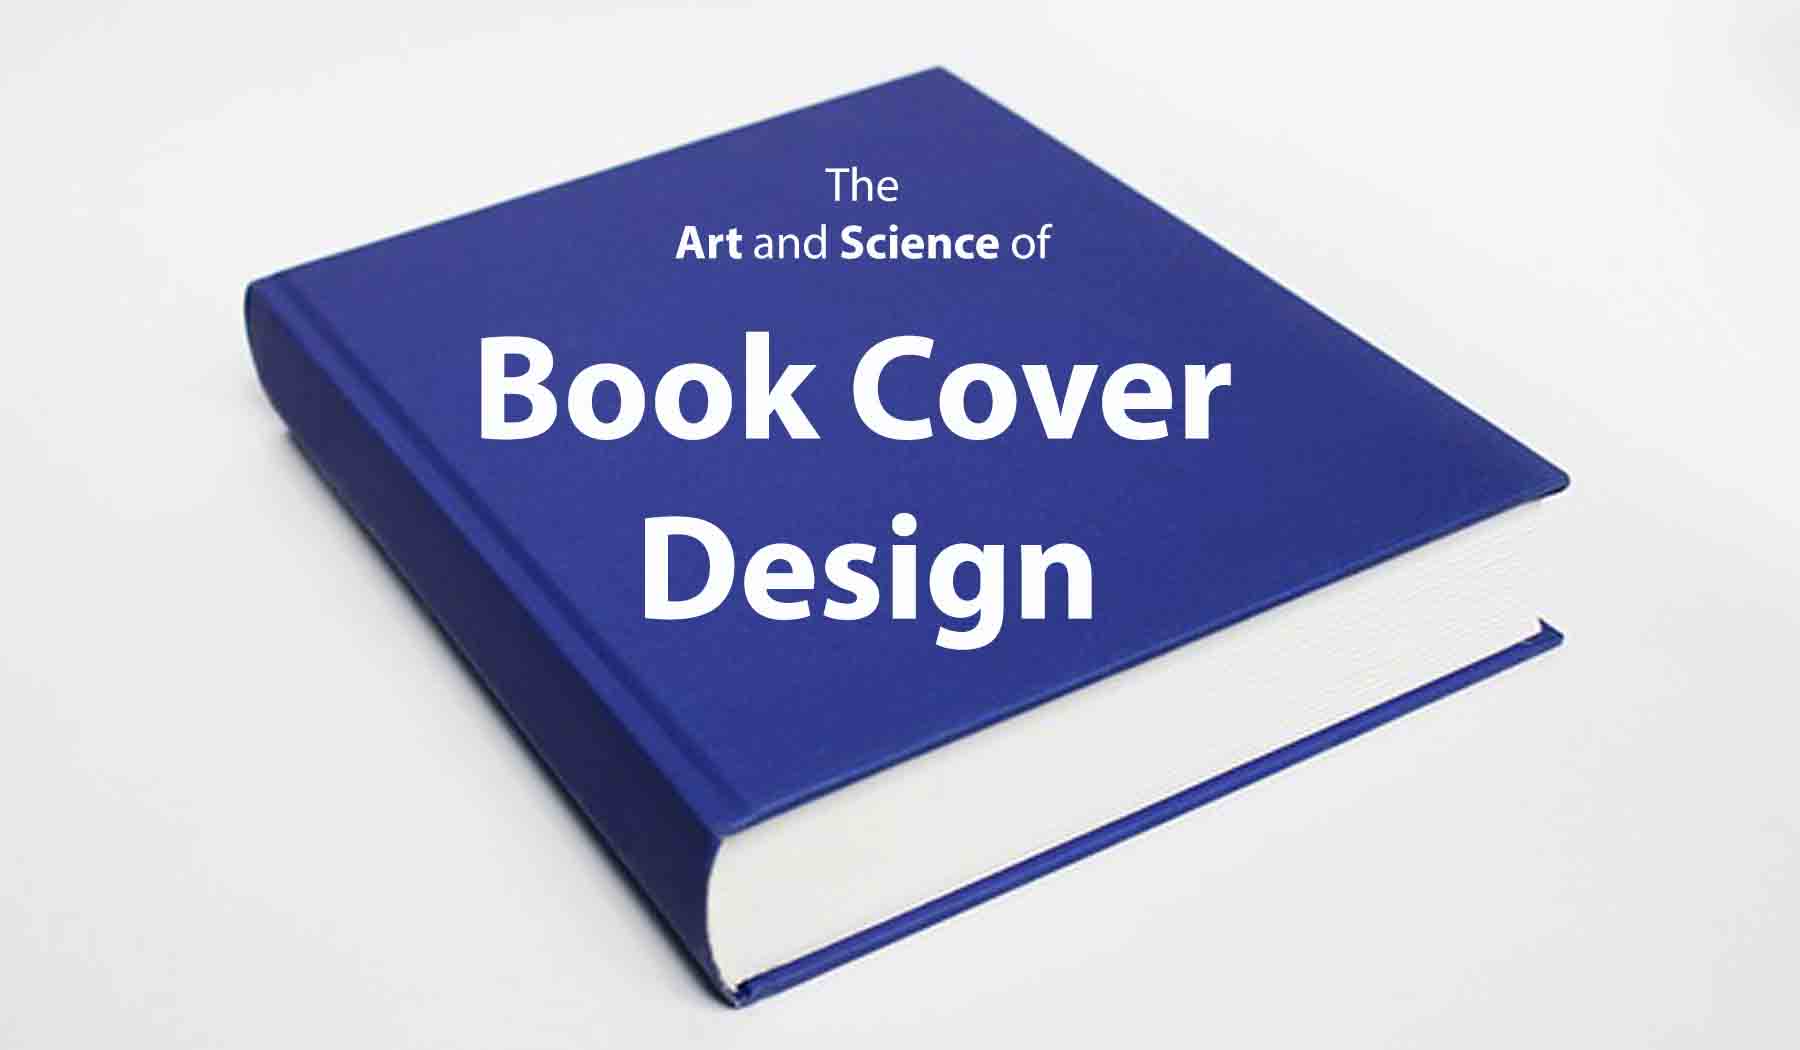 The Art and Science of Book Cover Design - Vincent and Friends Media Co.